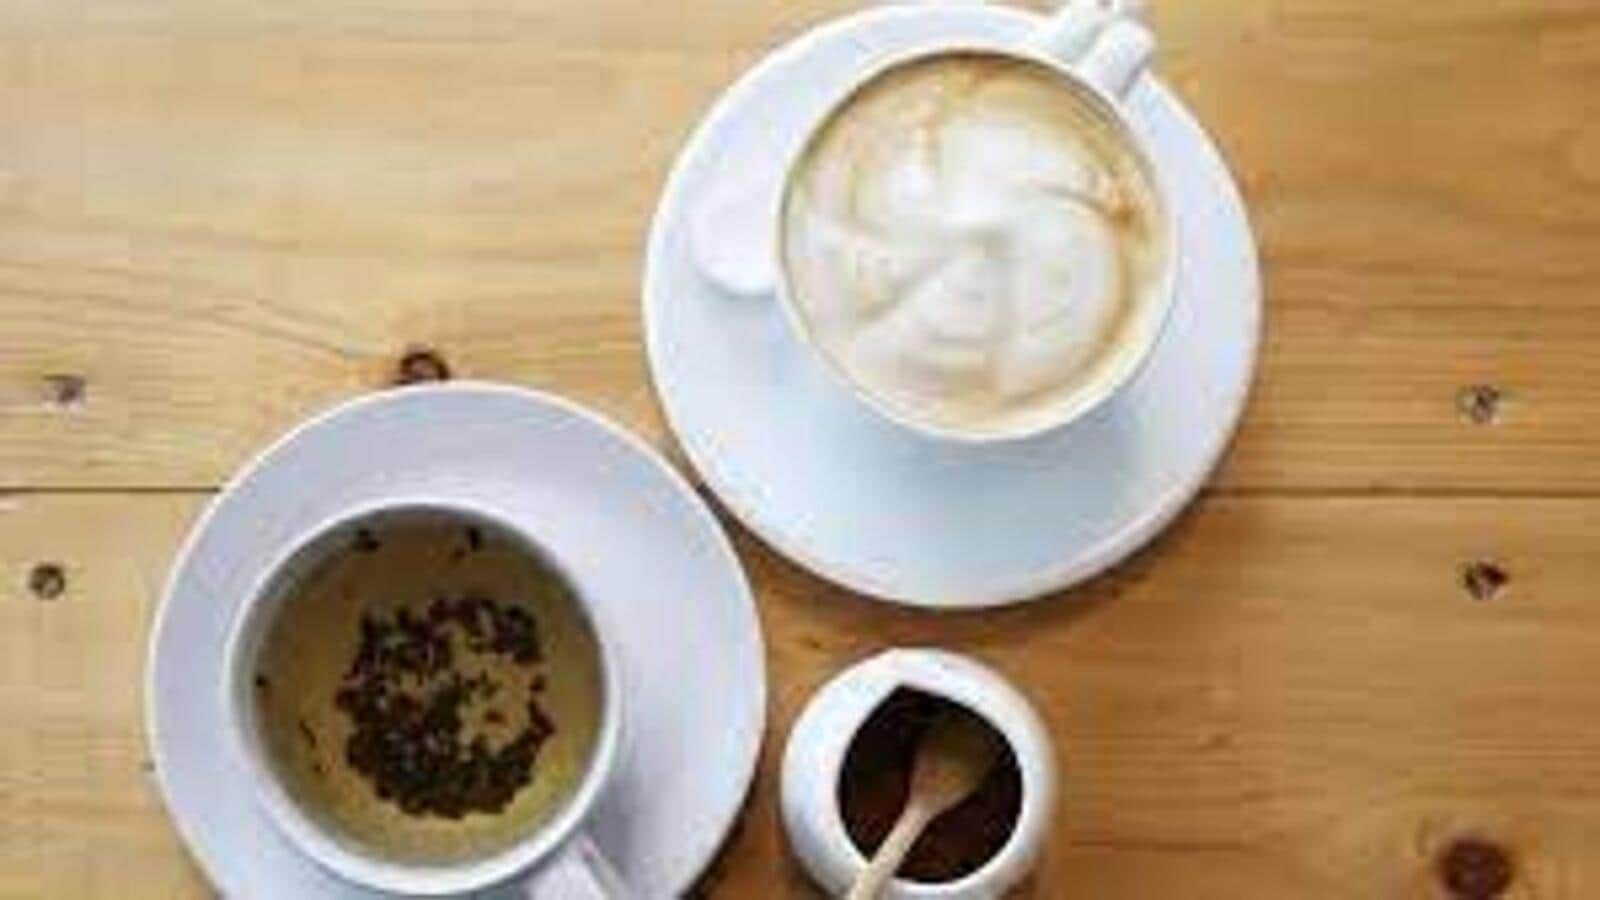 Spice of Life  Making tea in the City of Starbucks - Hindustan Times